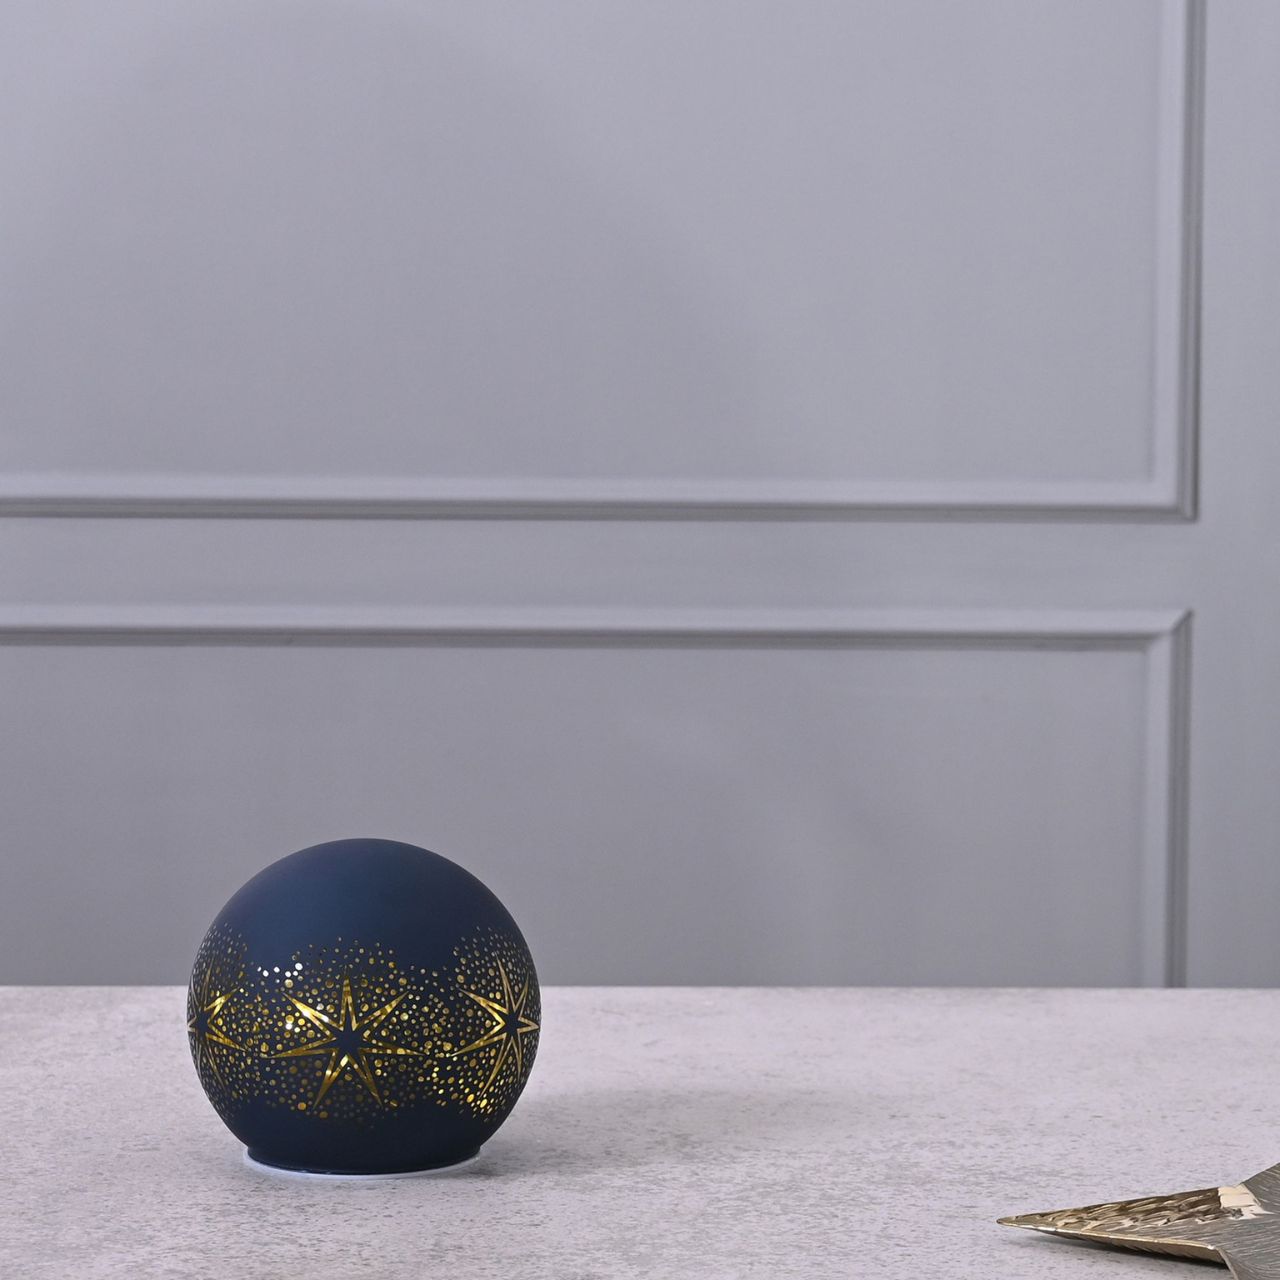 Christmas Celestial Globe LED Light  A celestial globe LED light by THE SEASONAL GIFT CO®.  This glistening globe light will help to create a magical Winter Wonderland at home this festive period.